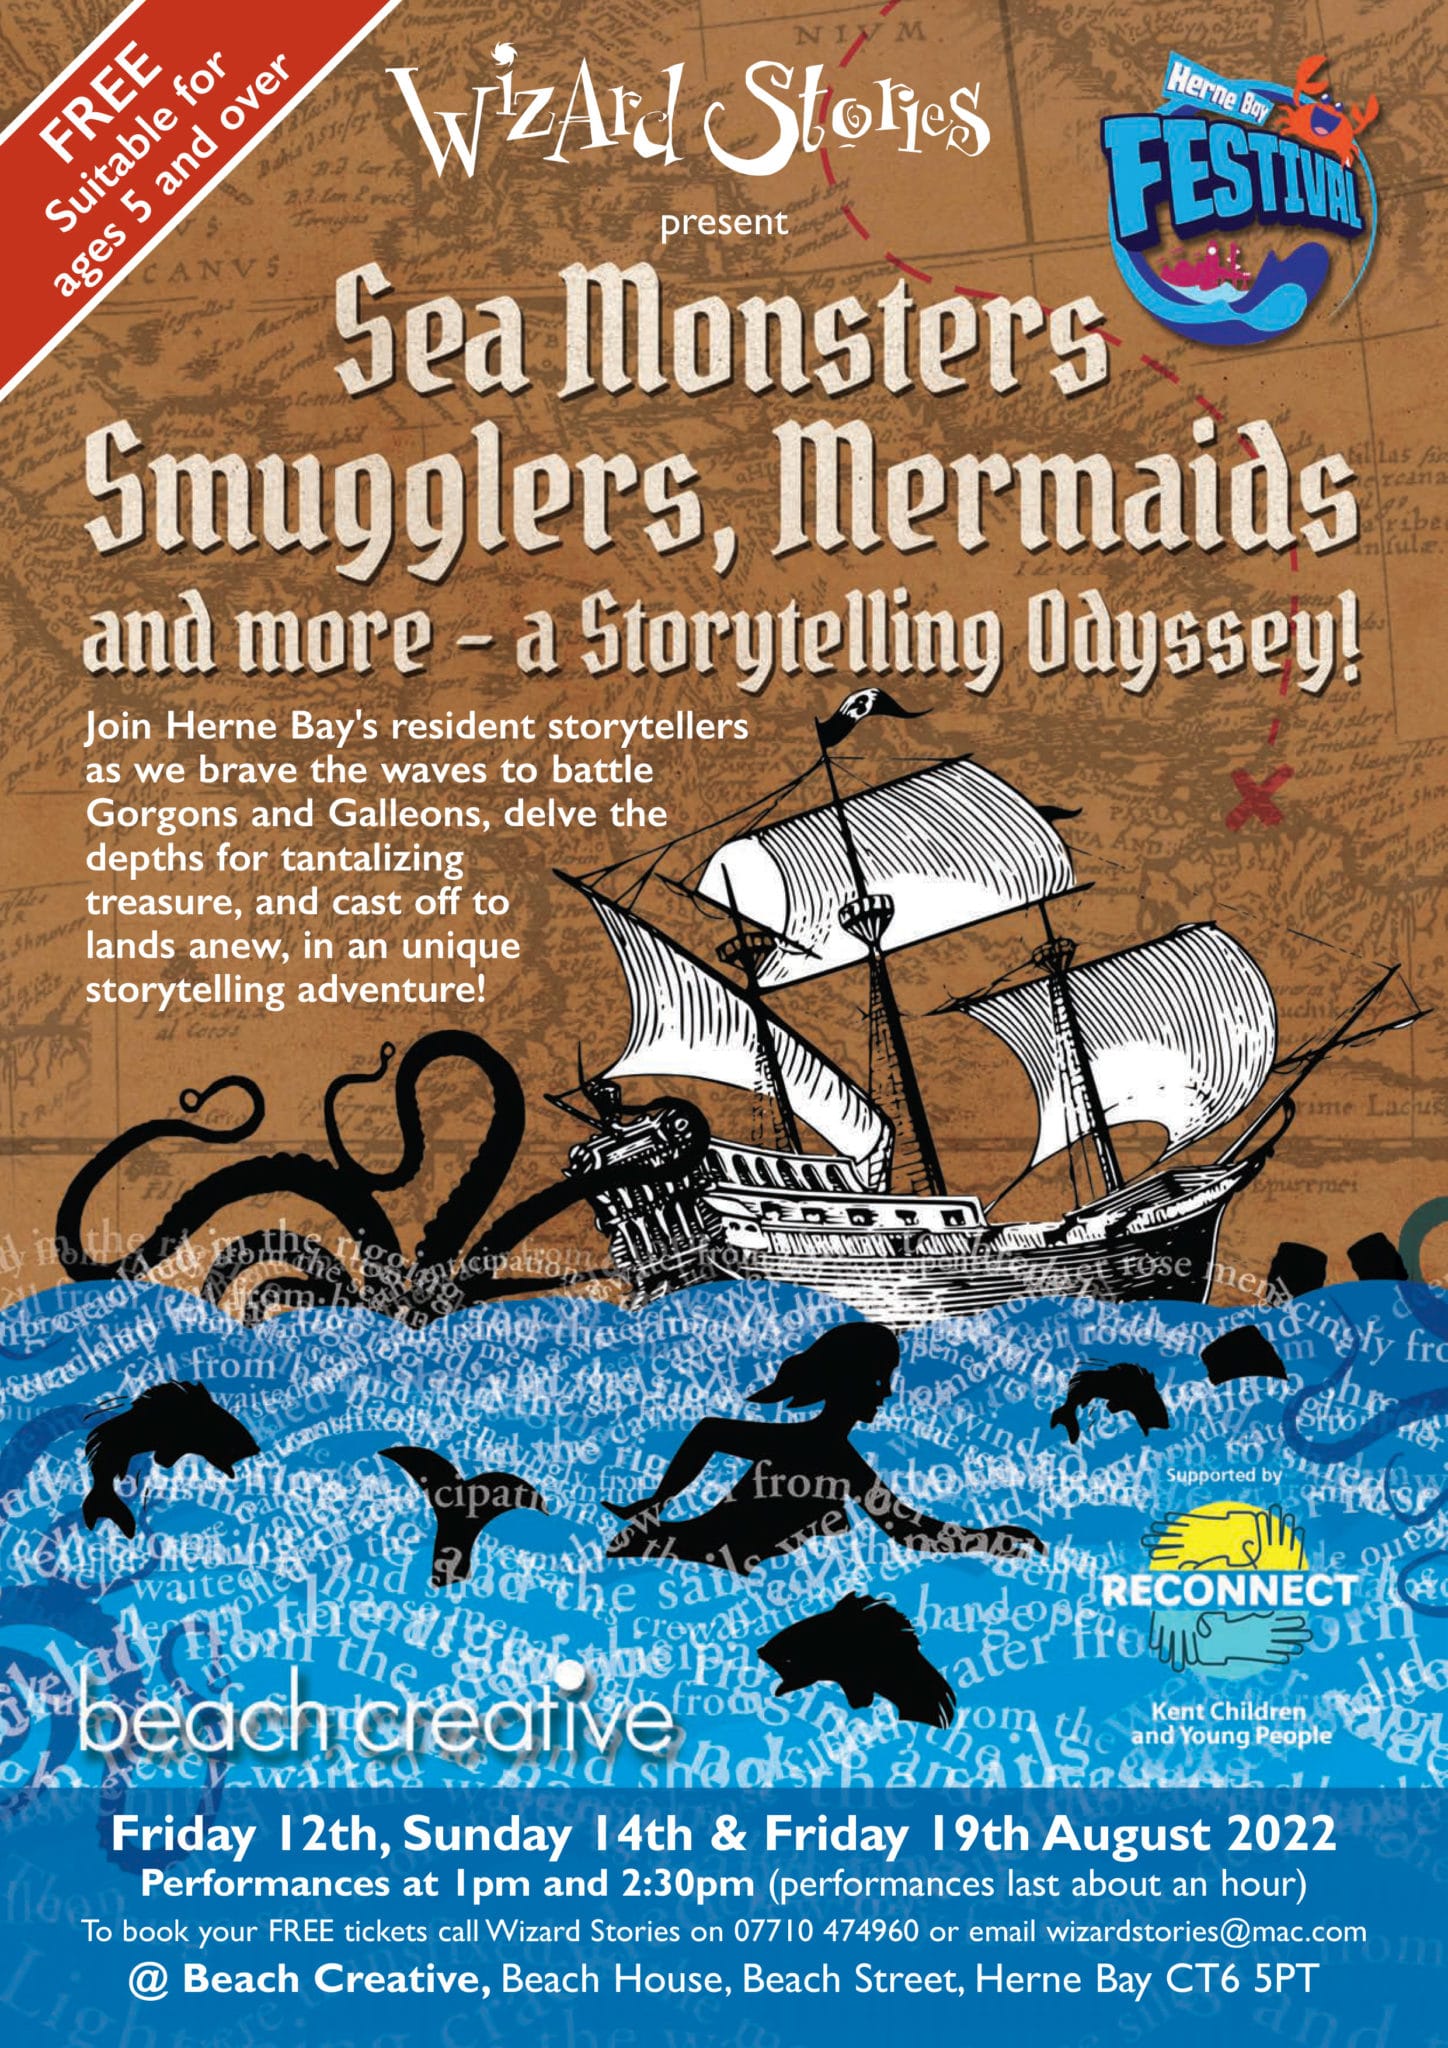 Sea Monsters, Smugglers, Mermaids and More!! A Storytelling Odyssey!!